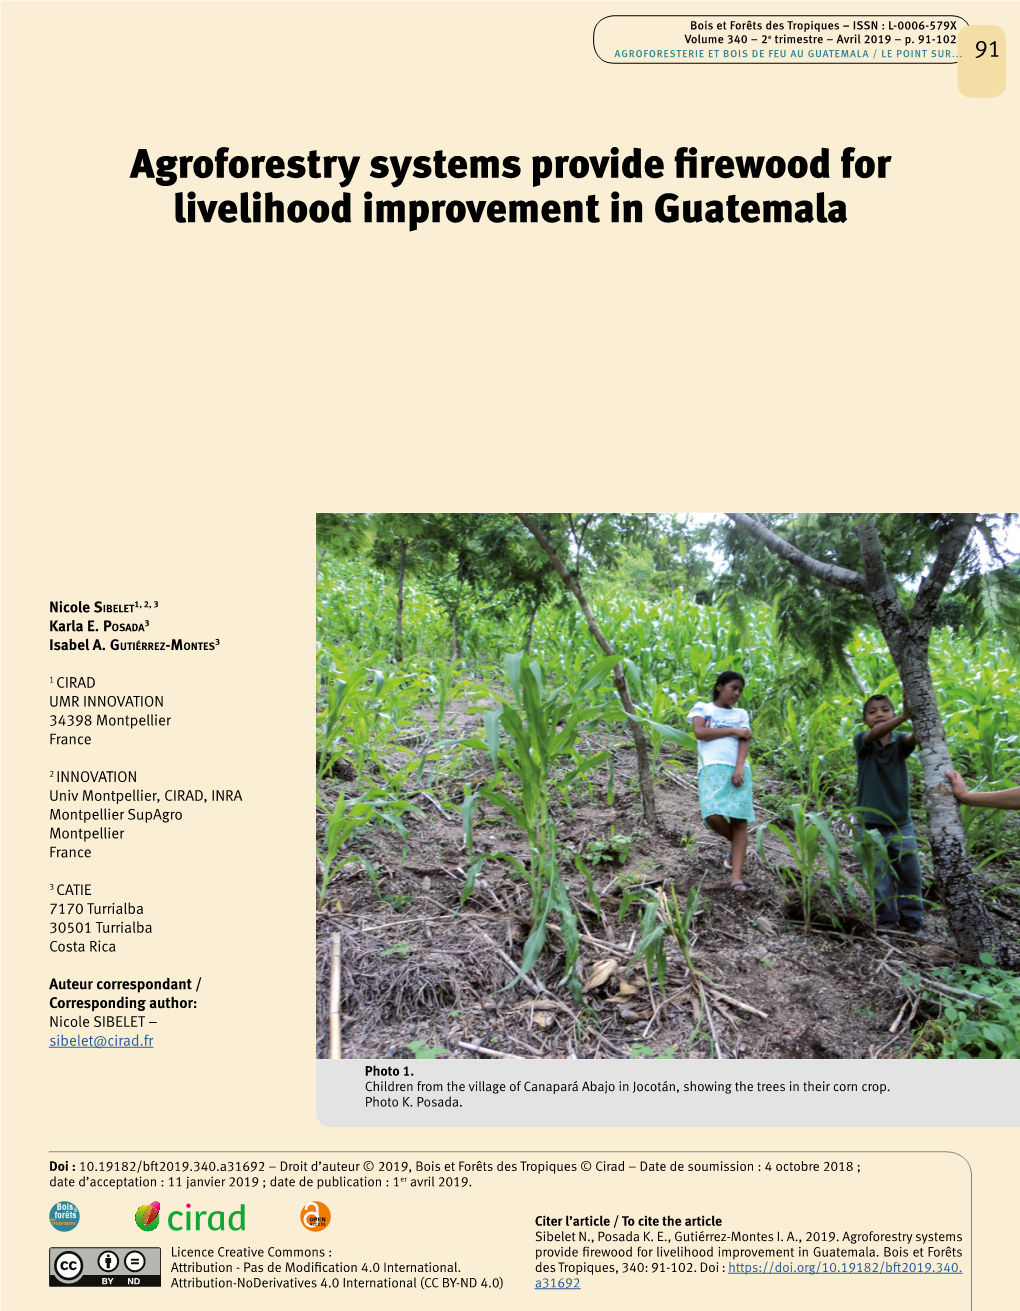 Agroforestry Systems Provide Firewood for Livelihood Improvement in Guatemala